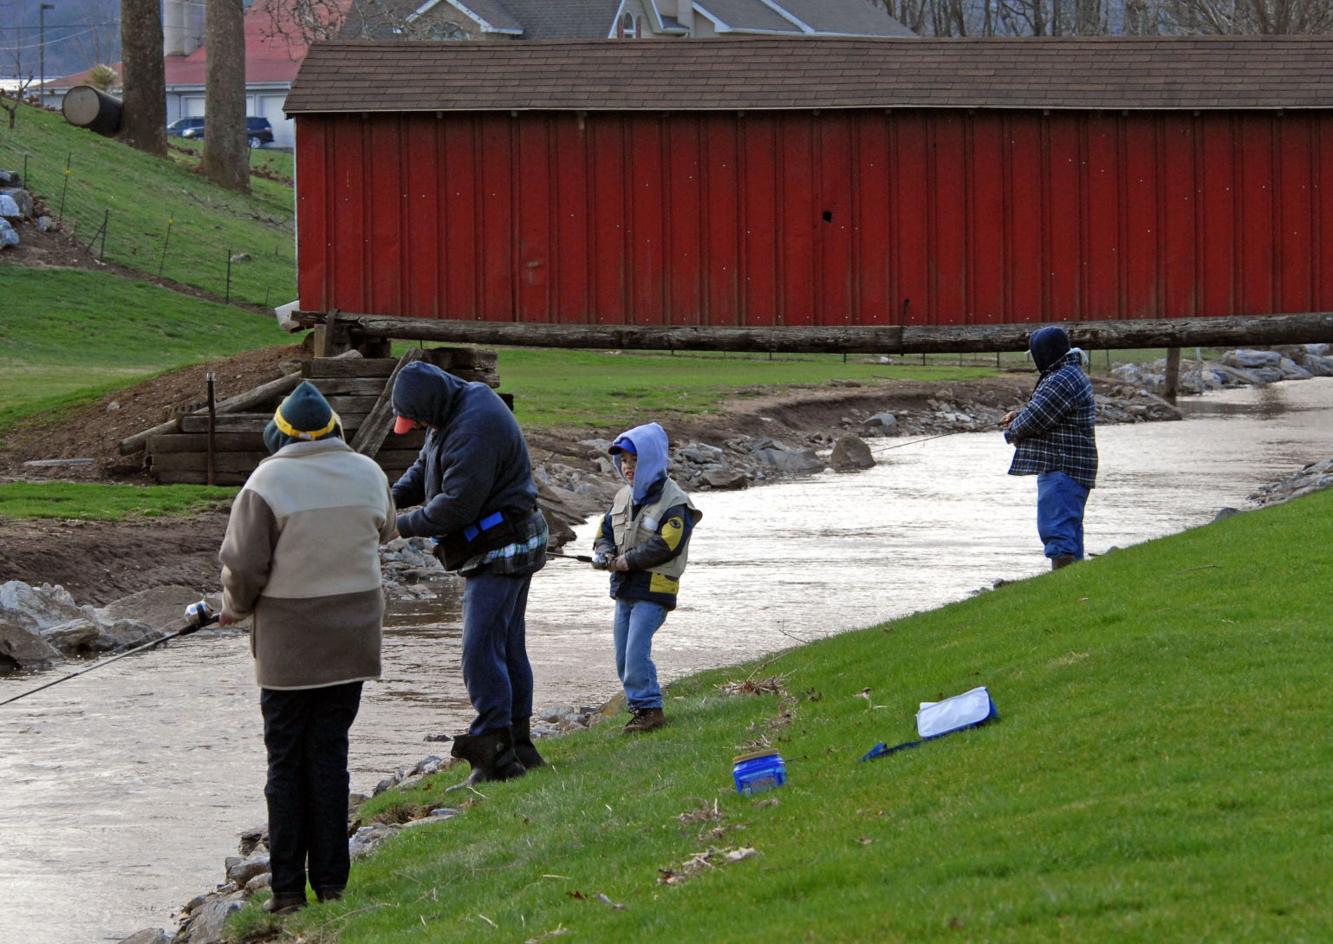 Pennsylvania trout-stocking schedules released | Outdoors